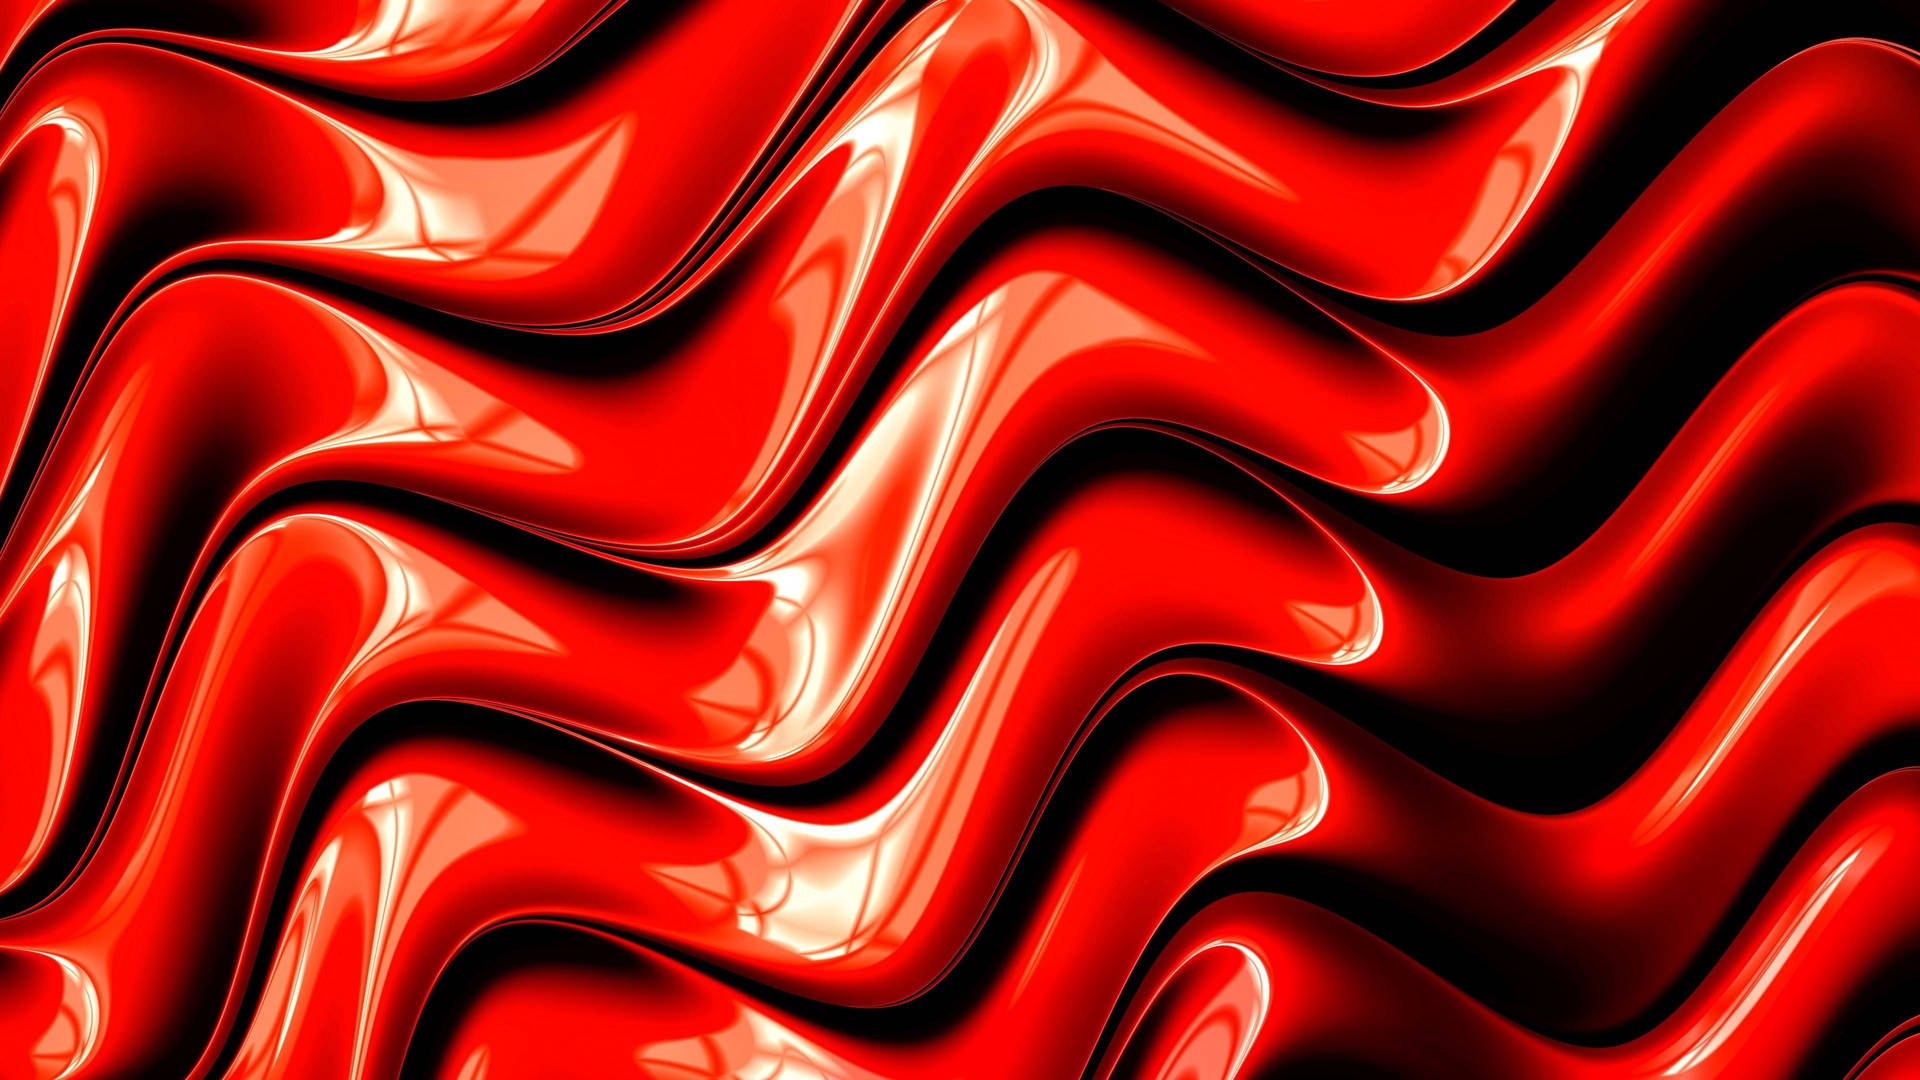 Free Cool Red Wallpaper Downloads, [100+] Cool Red Wallpapers for FREE |  